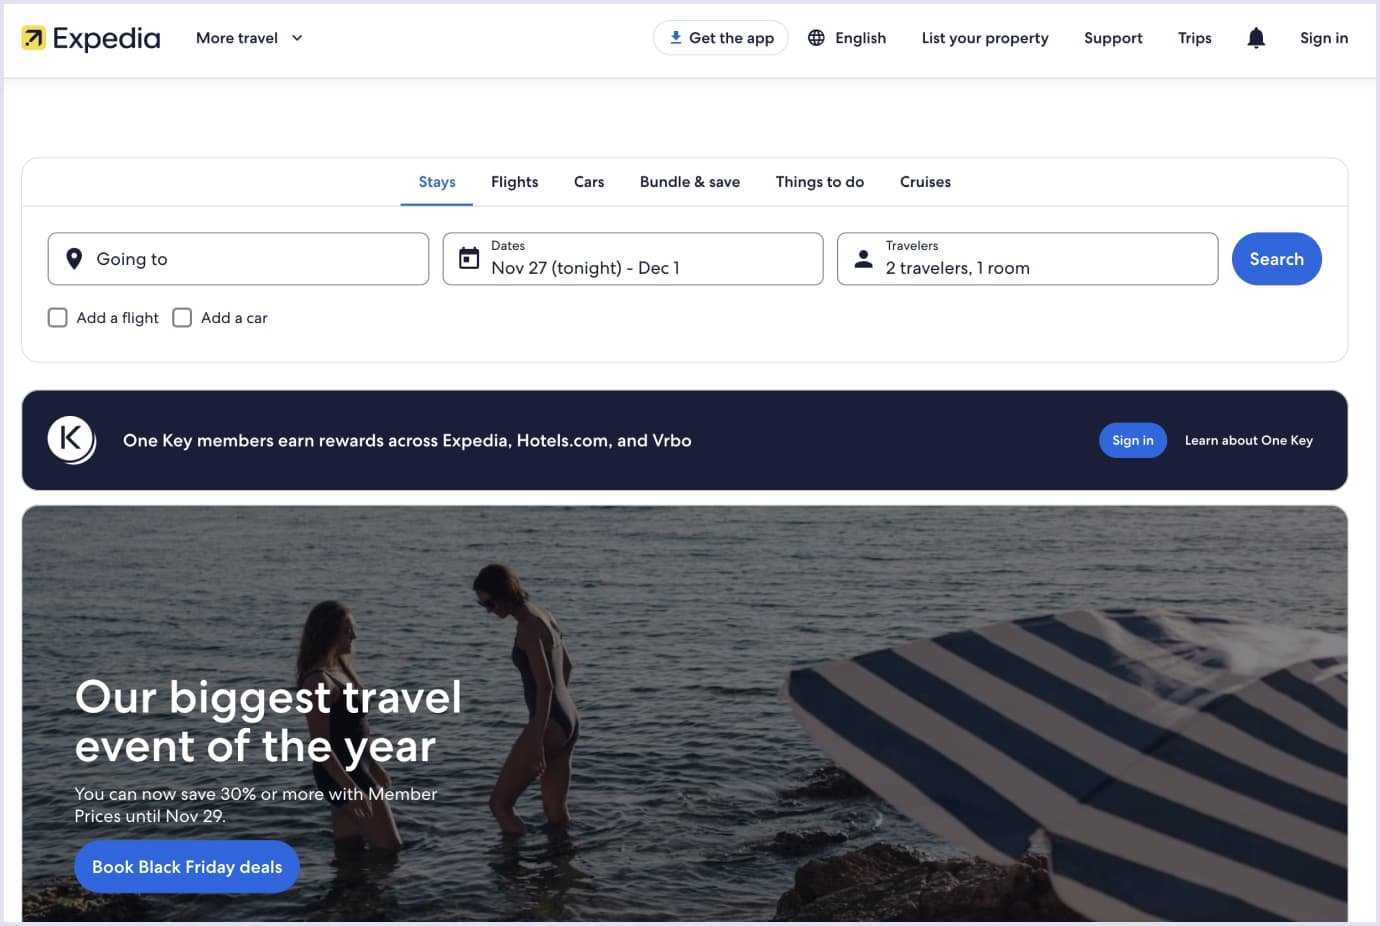 Home page of Expedia's webiste